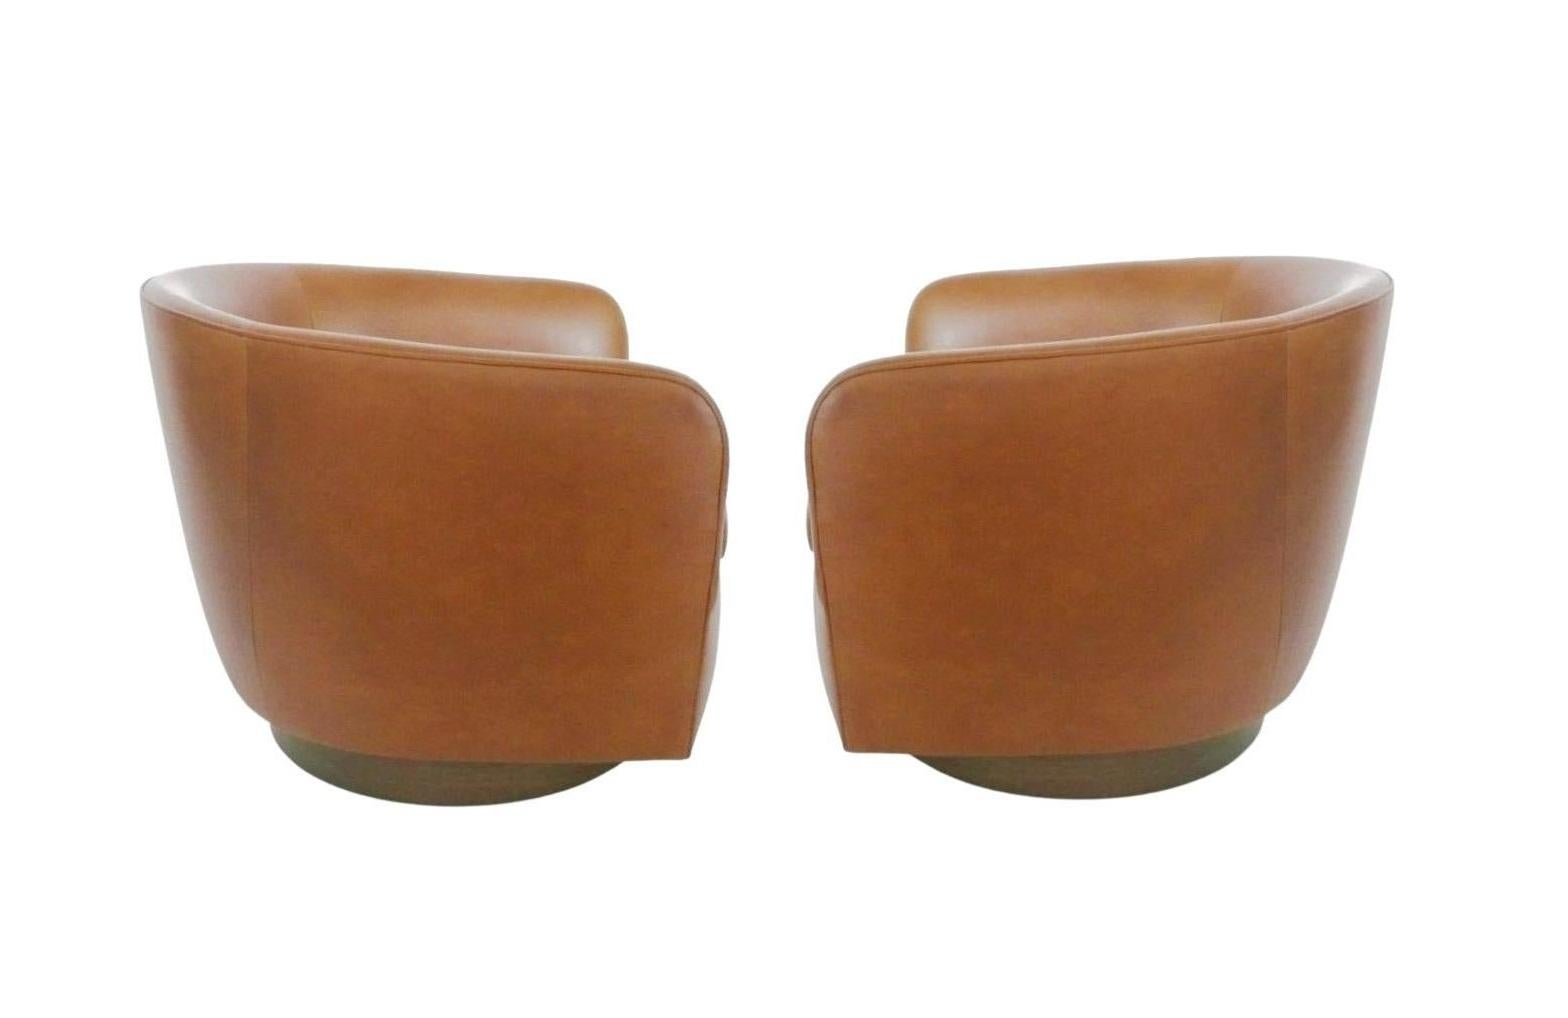 leather swivel chair